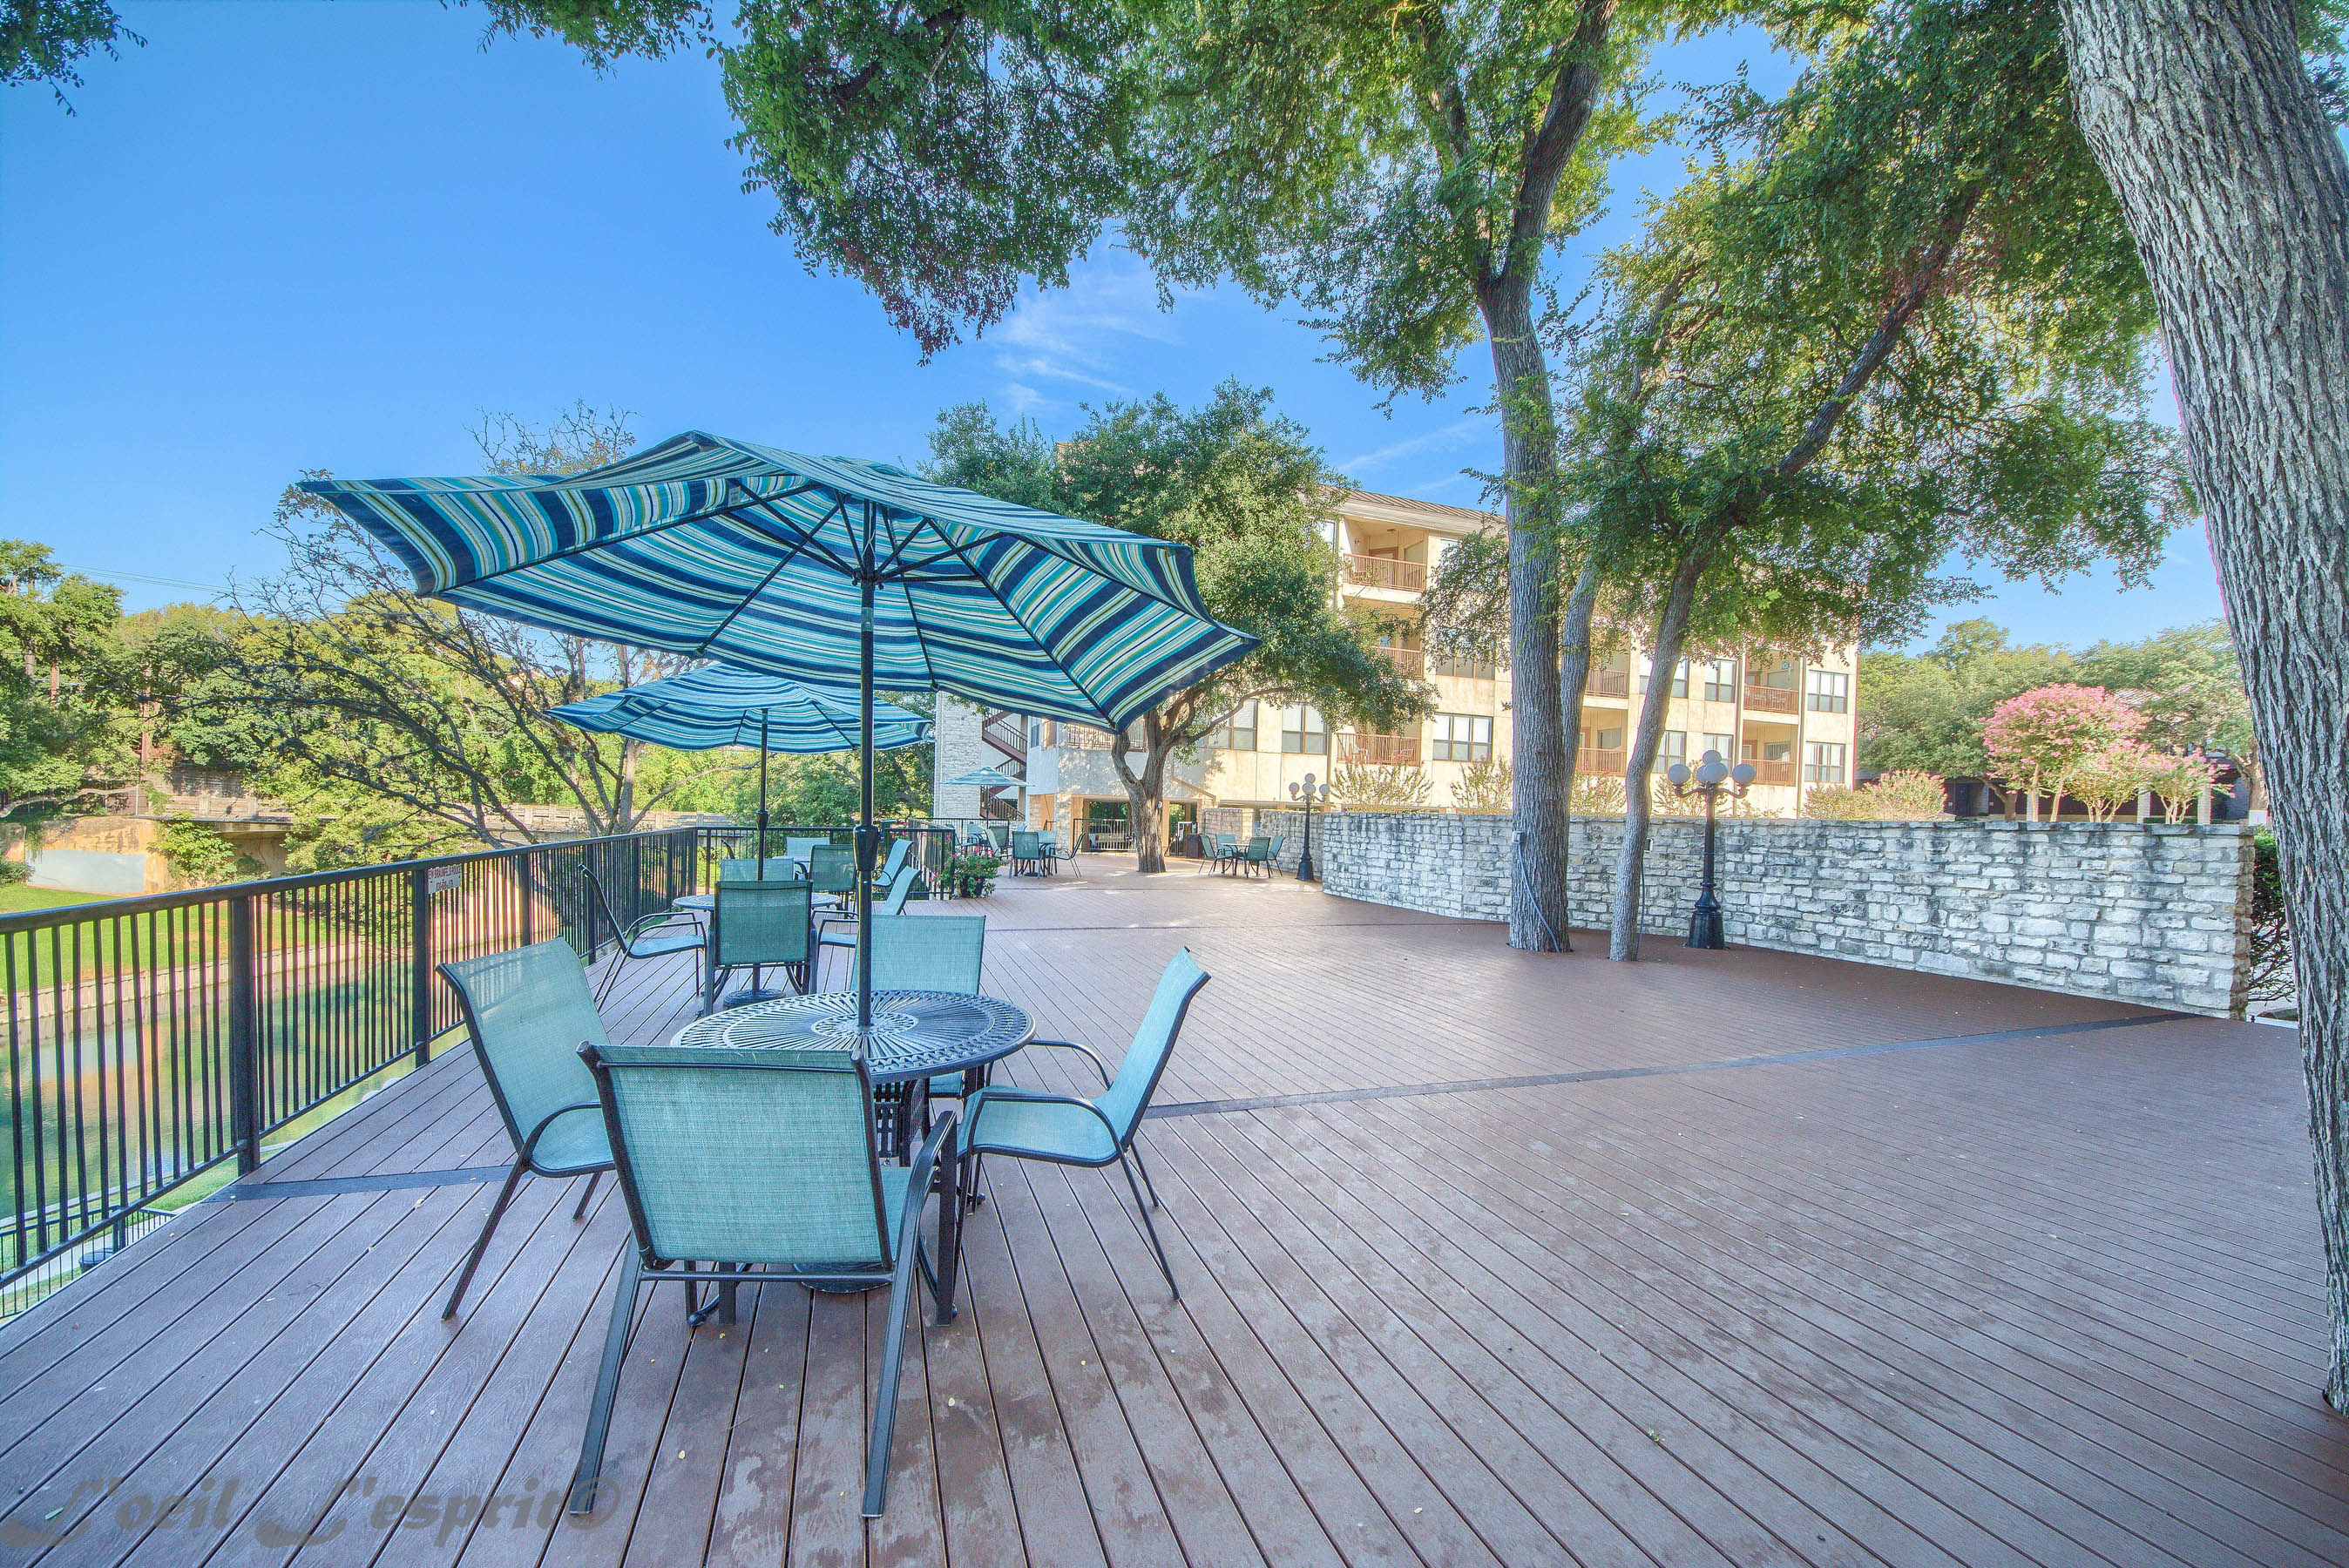 Large deck looking over the Comal river and swimming pool!